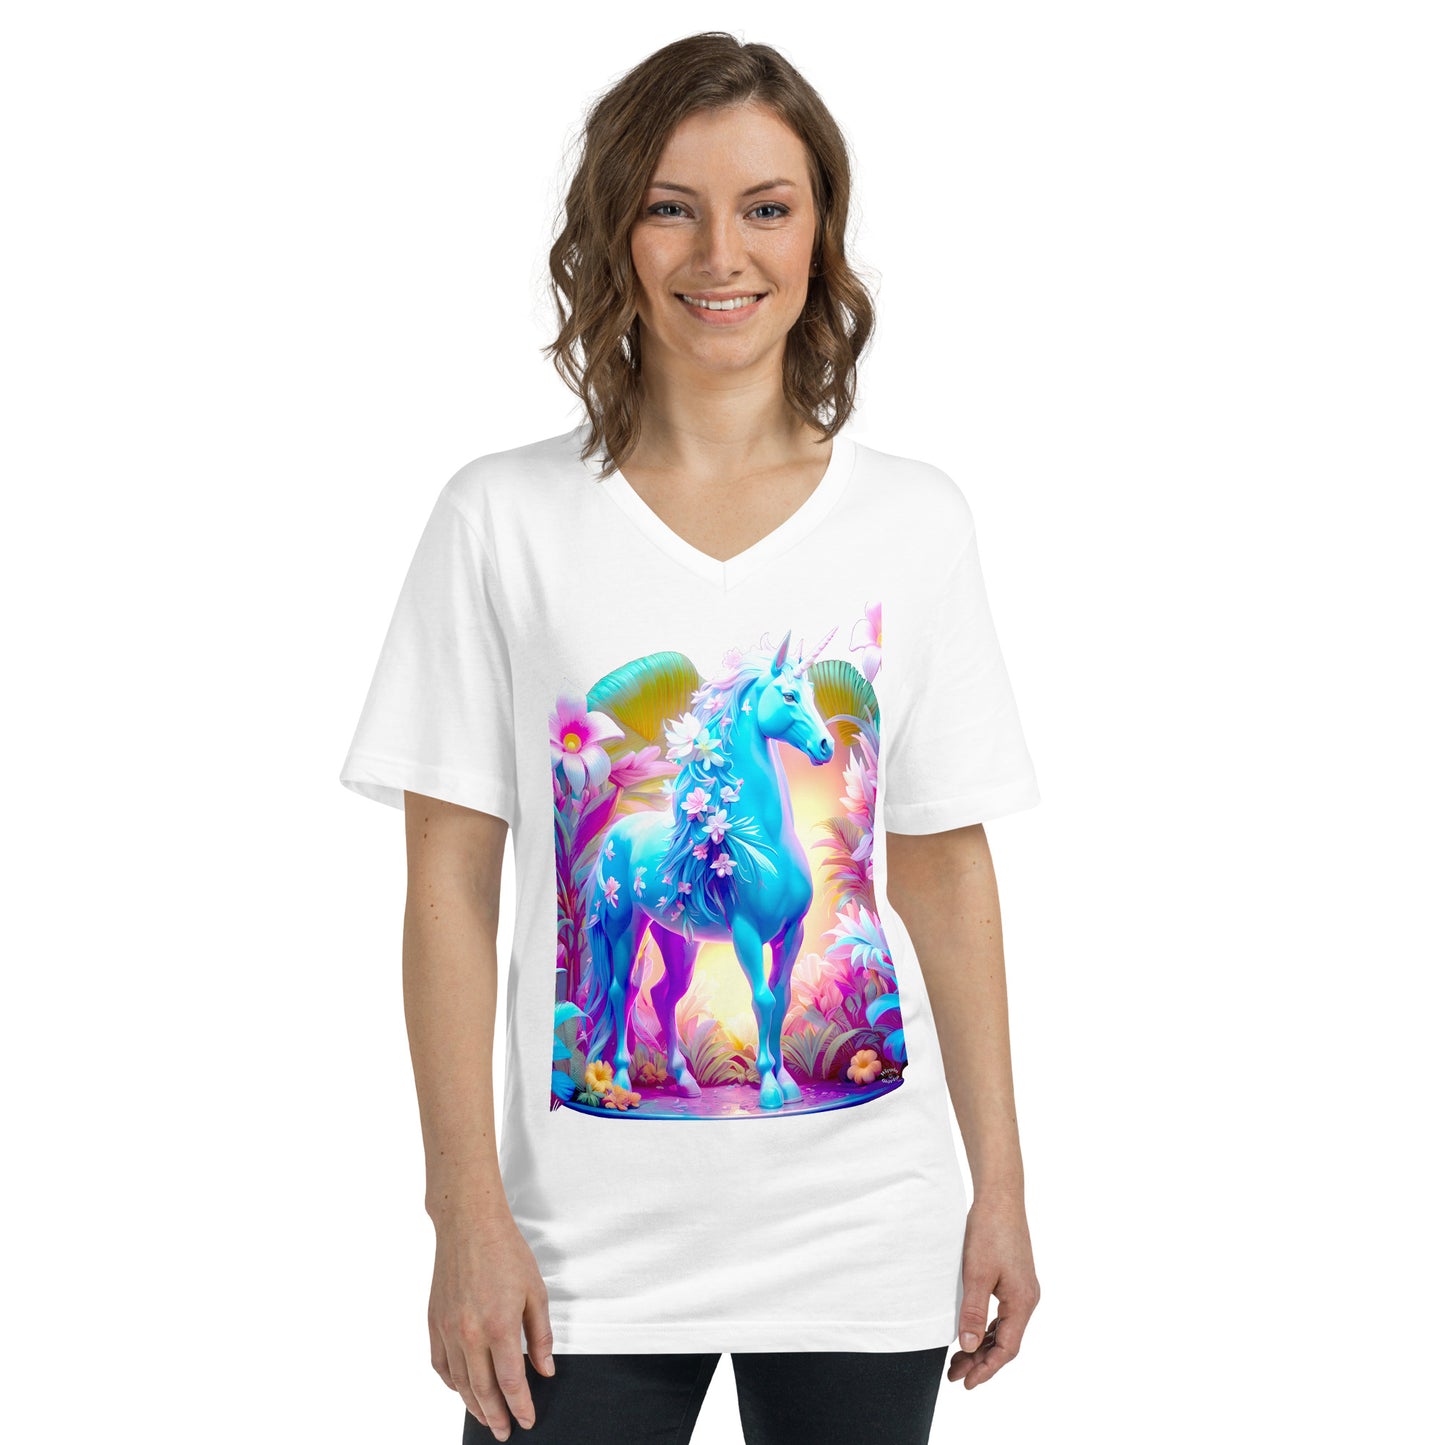 A picture of a woman wearing a tshirt with a brightly colored unicorn surrounded by a colorful garden - Jungle Unicorn Unisex Short Sleeve V-Neck TShirt Media - ft - white